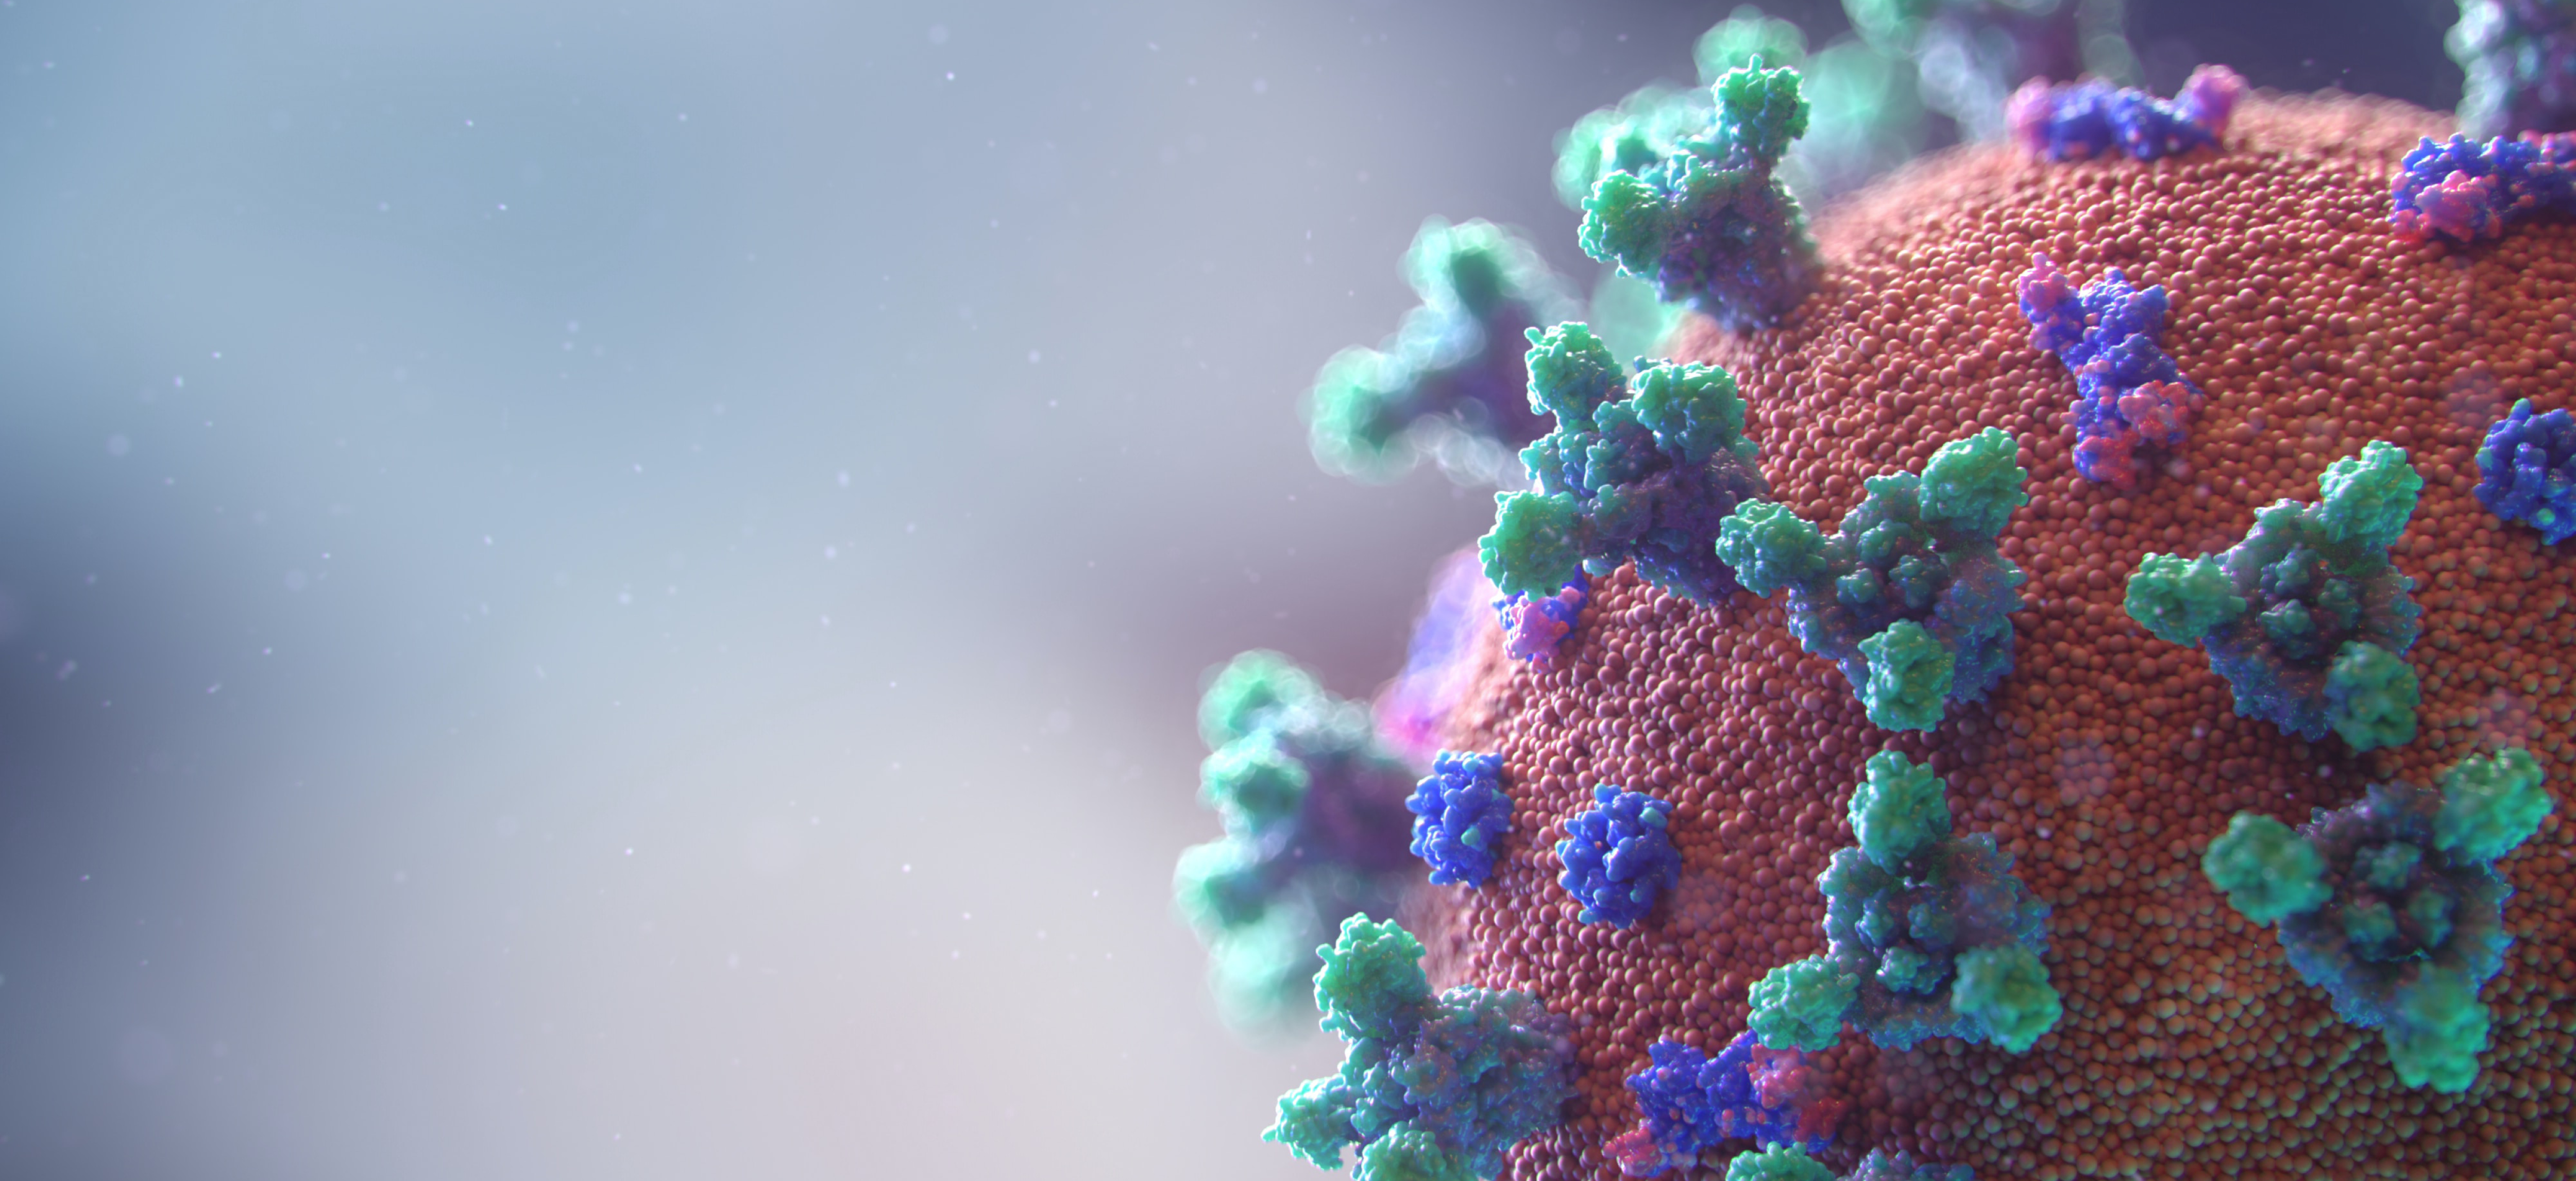 Computational modeling unveils dynamics of SARS-CoV-2 infection